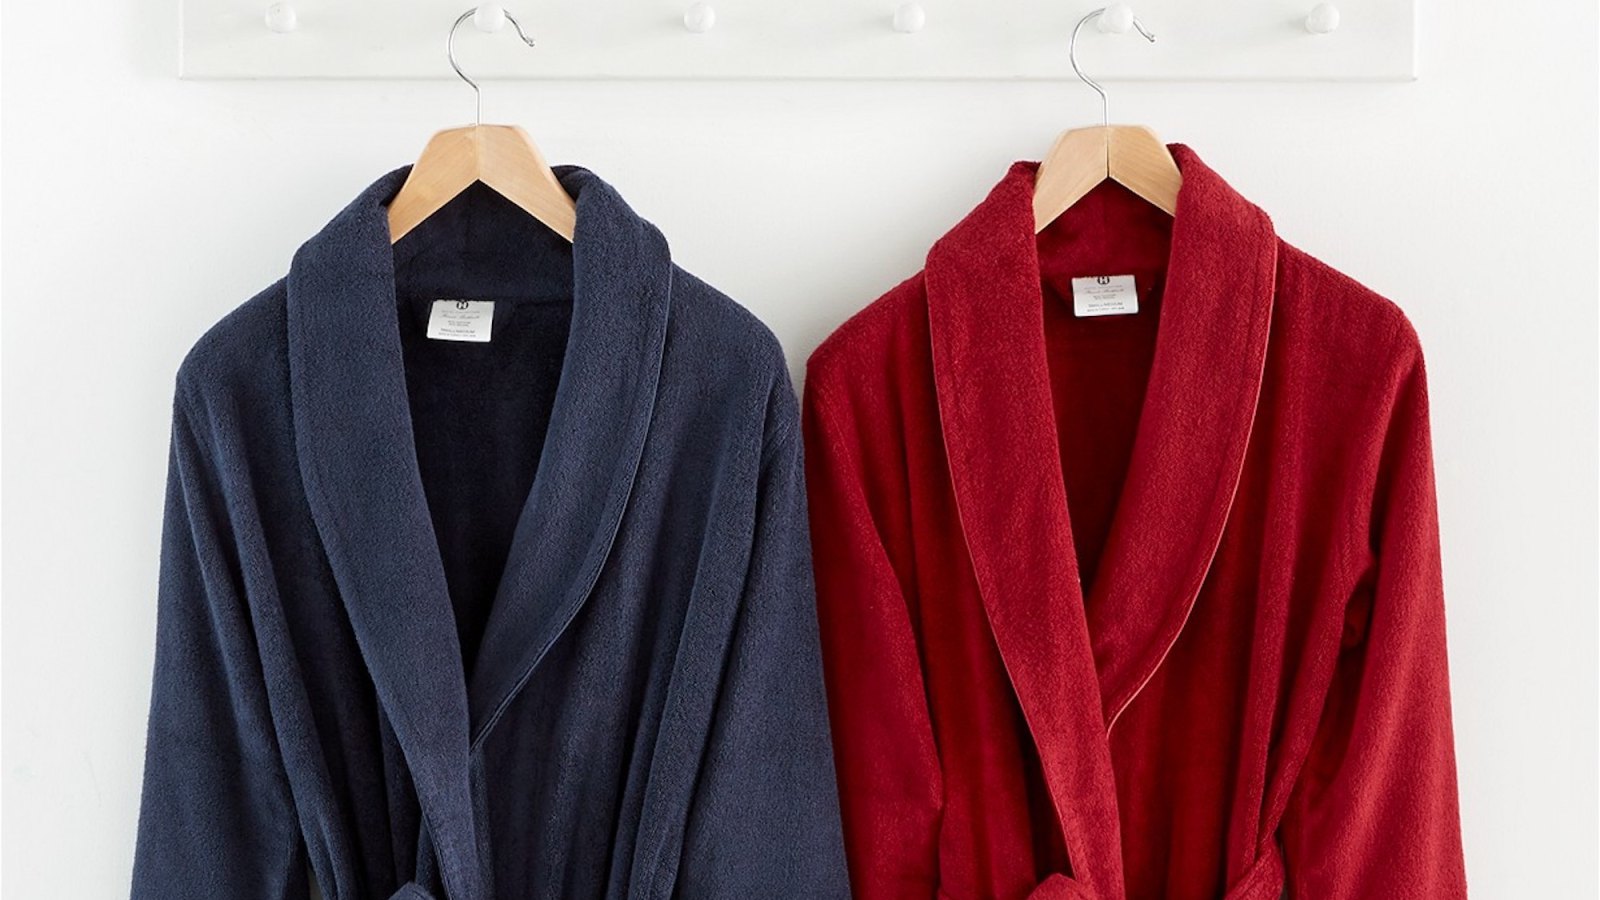 Hotel Collection Finest Modal Robe navy red